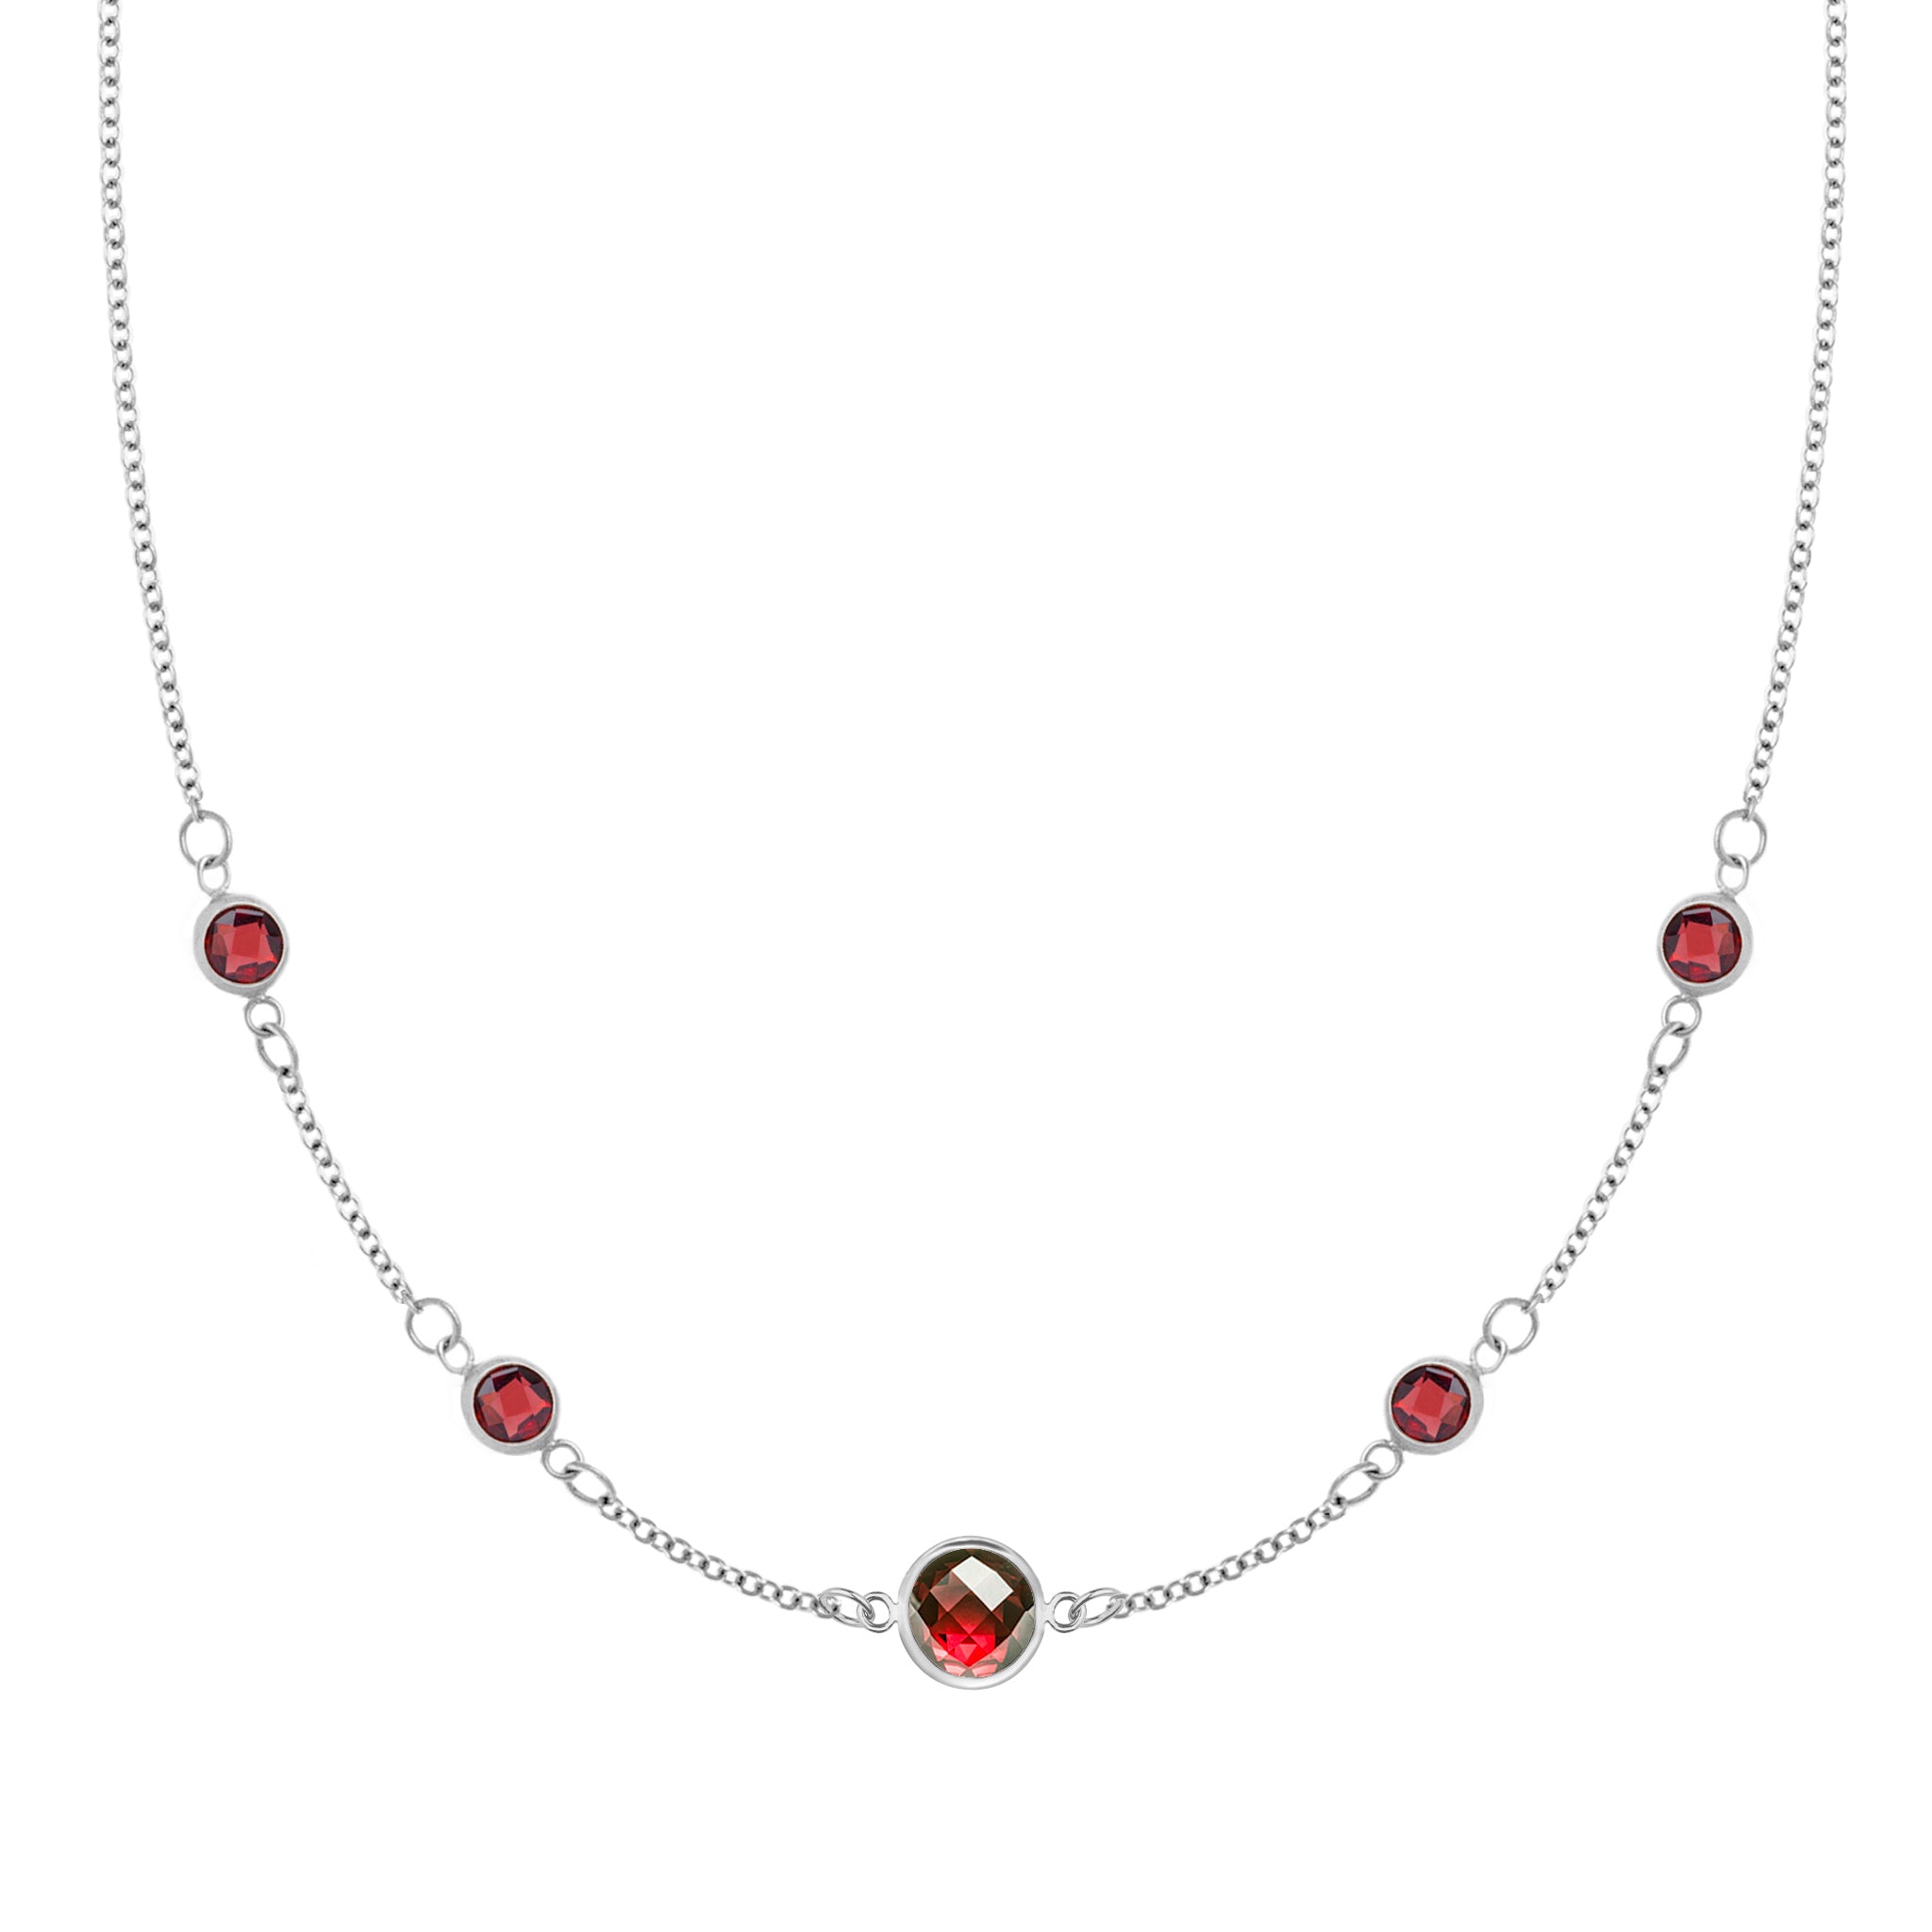 1 Grand & 4 Classic Garnet Necklace in 14k Gold (January)